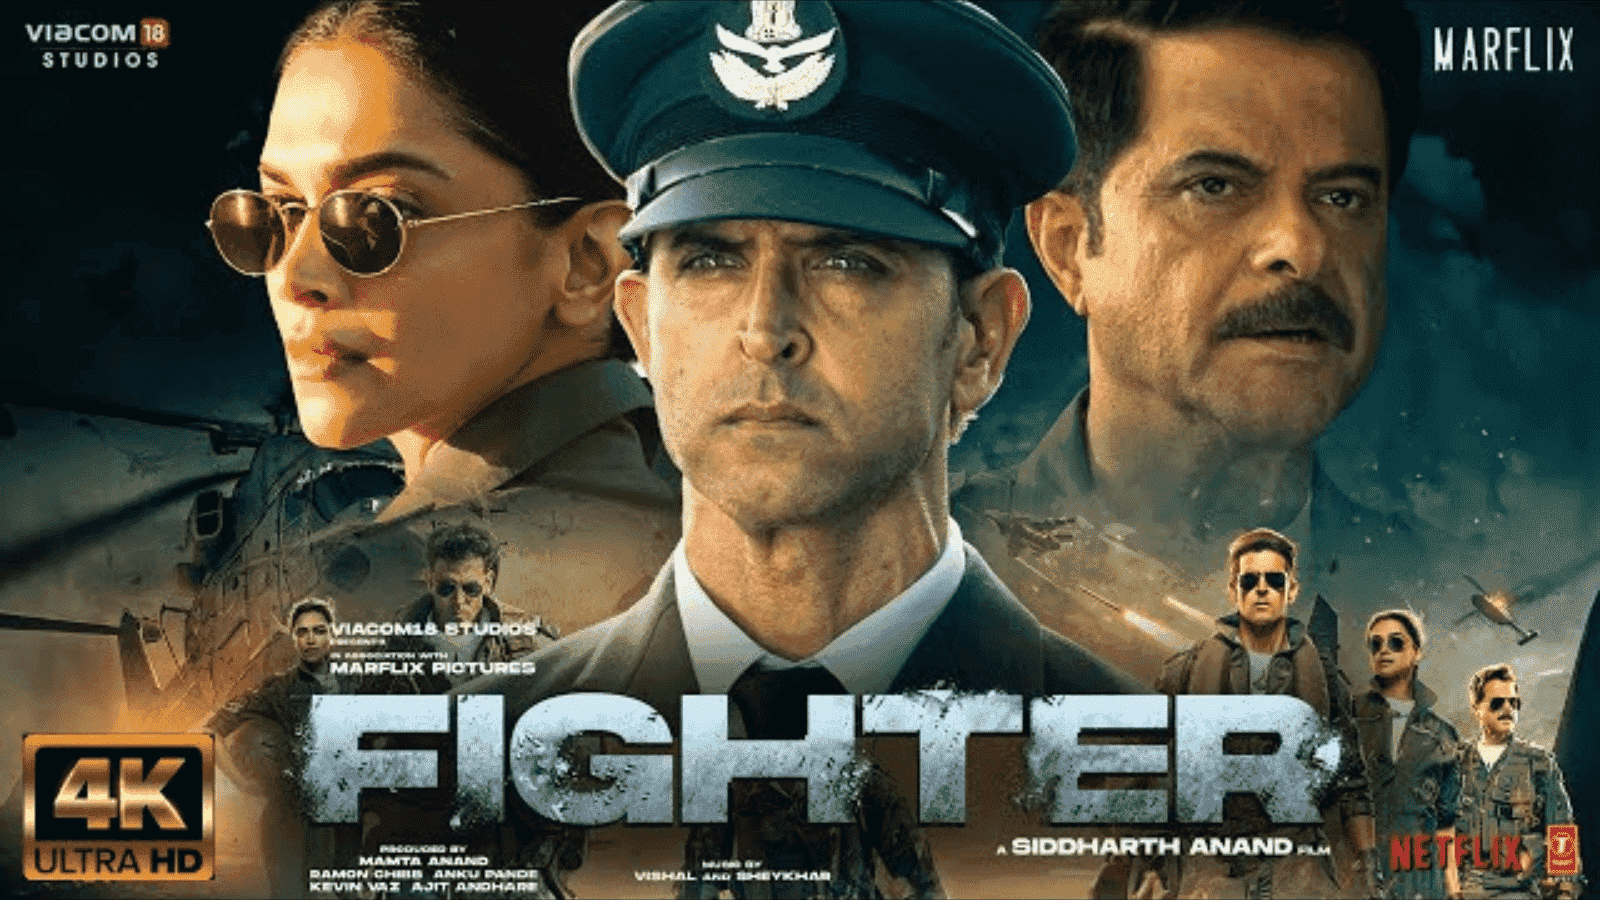 Bollywood Blockbuster Fighter Movie Hrithik Roshan Takes the Action to New Heights